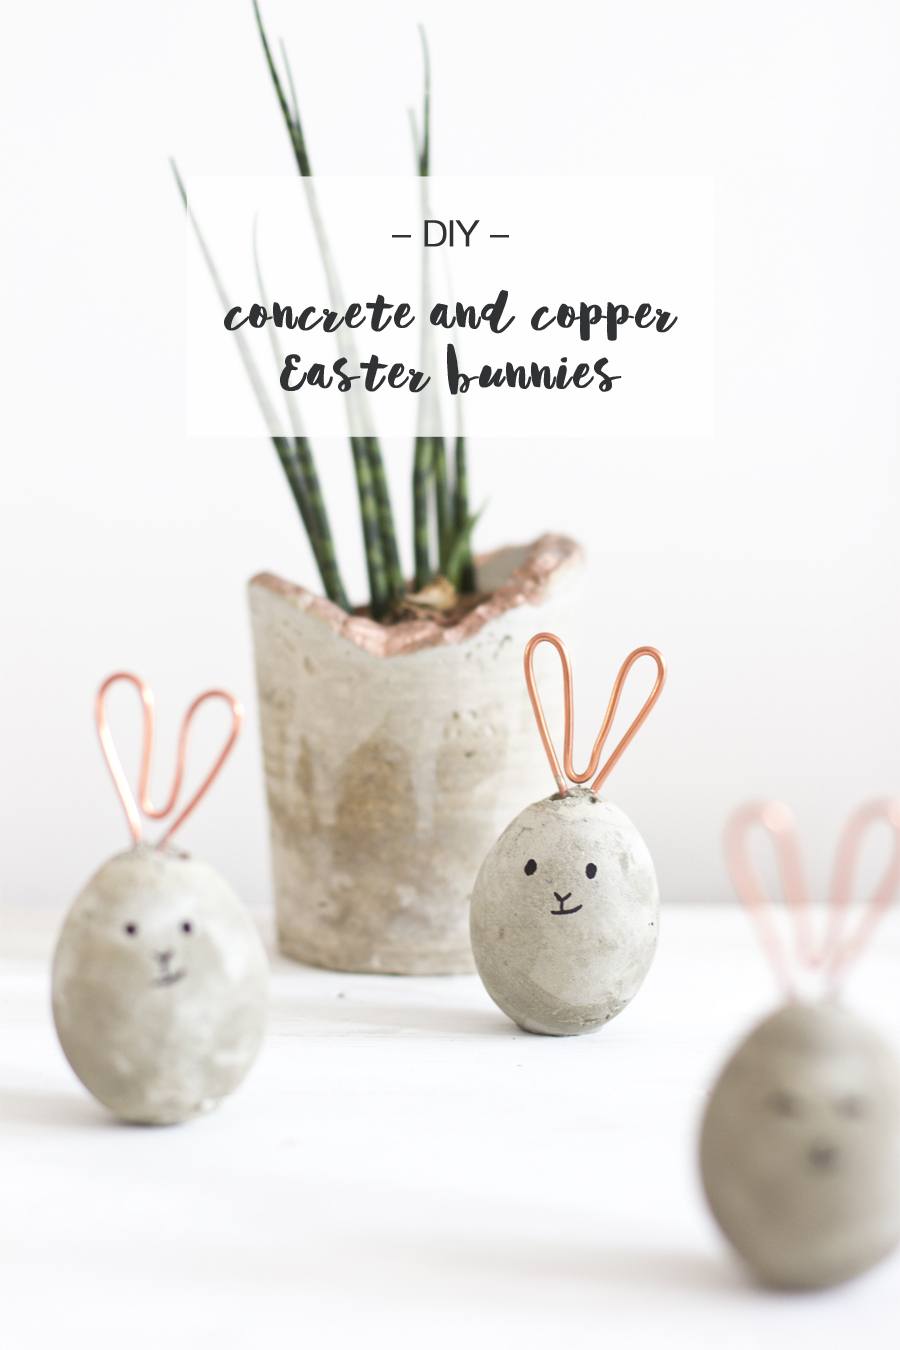 Copper and concrete Easter bunnies.